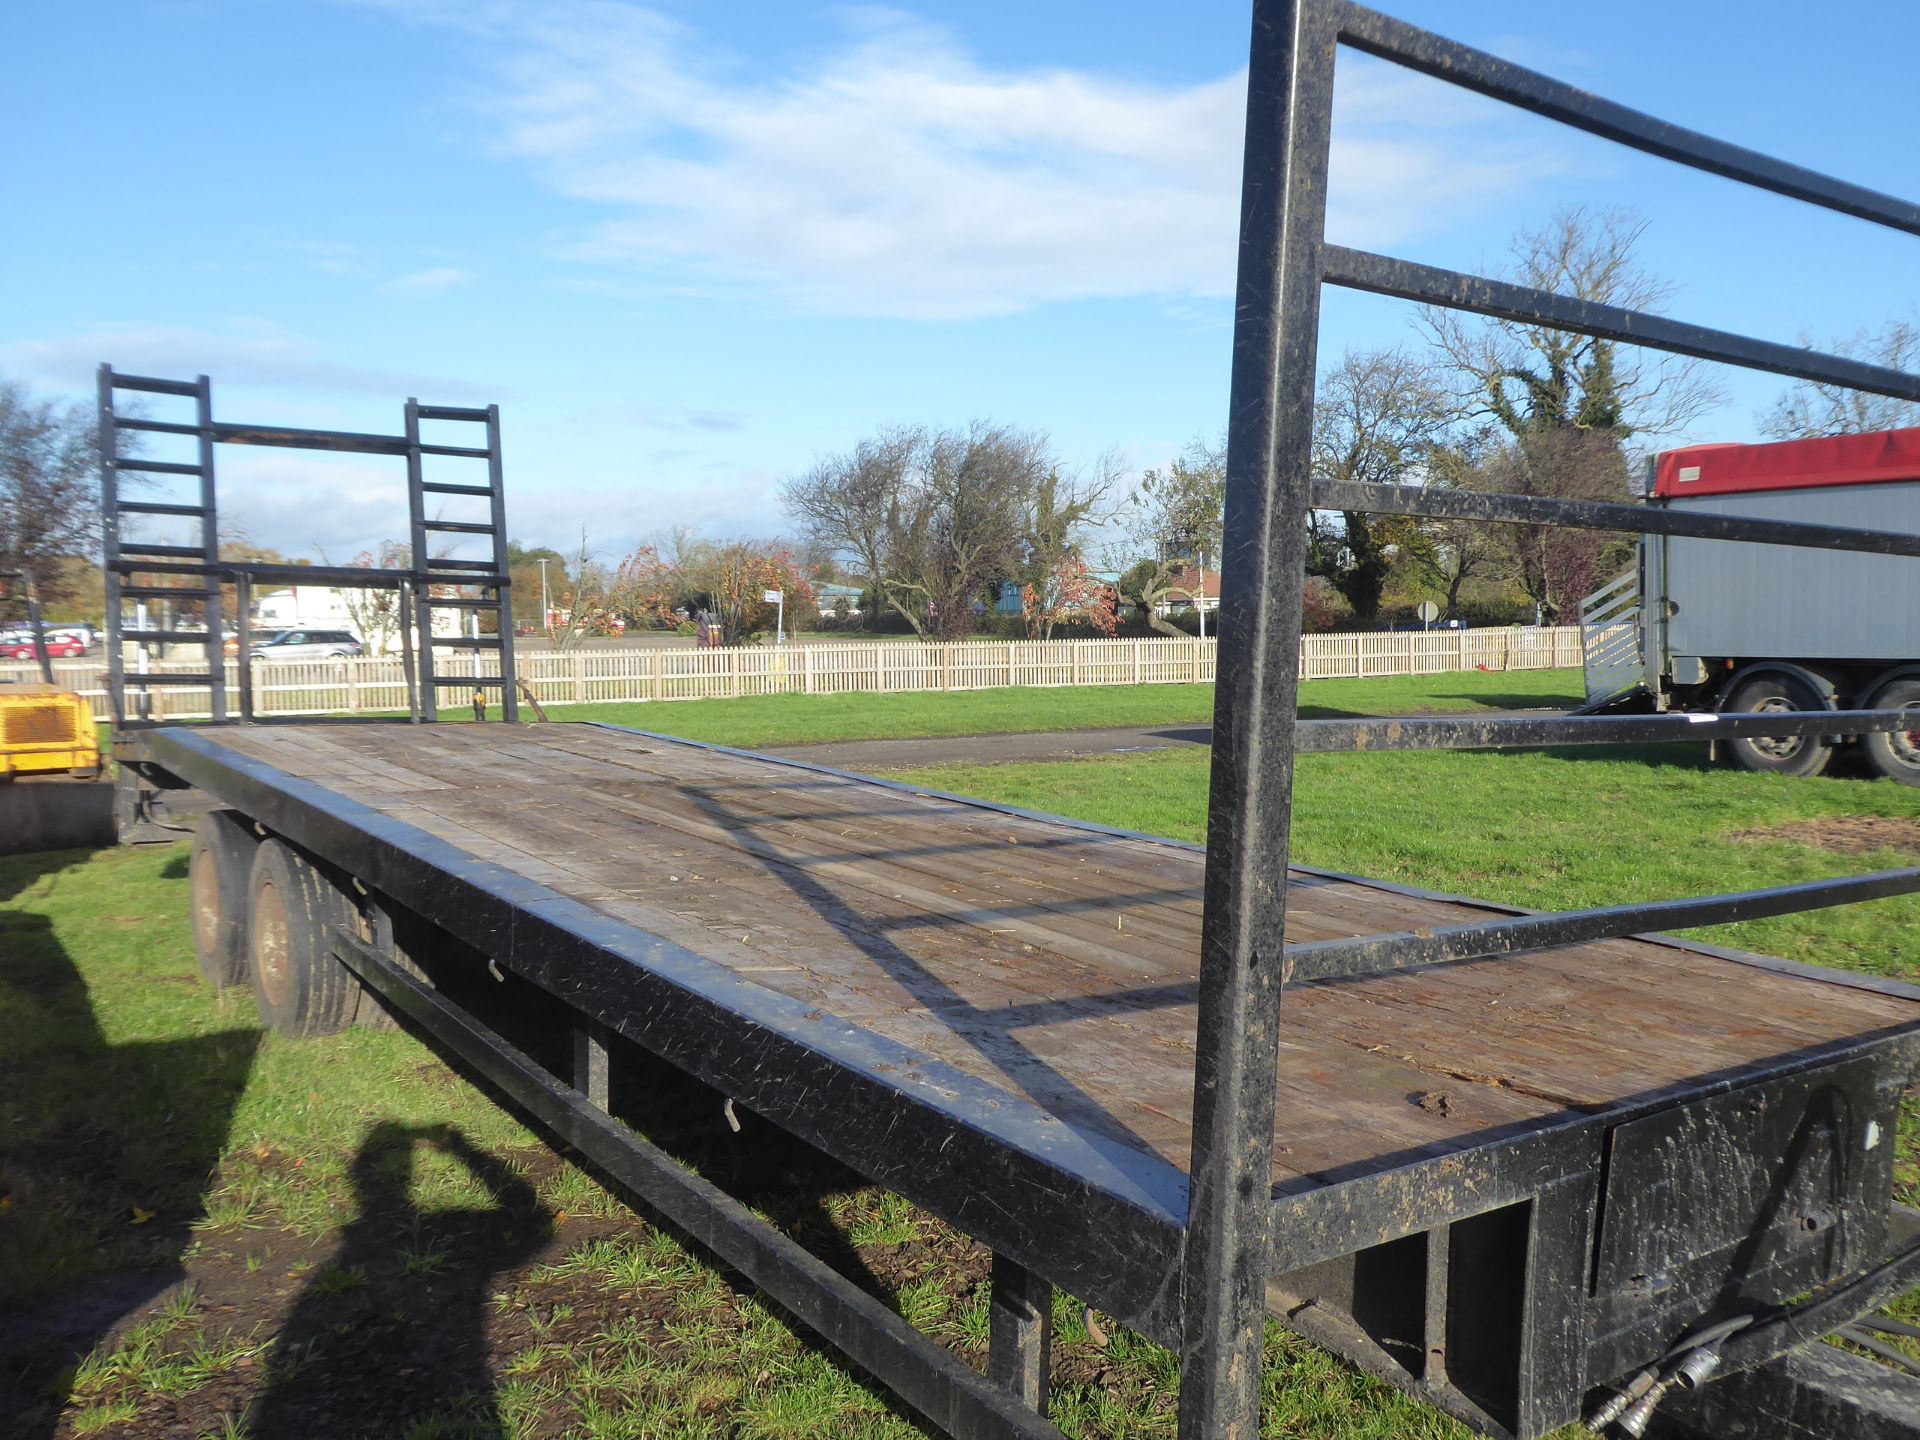 30ft flat bed low loader trailer , hydraulic lifting ramps, lights - Image 3 of 3